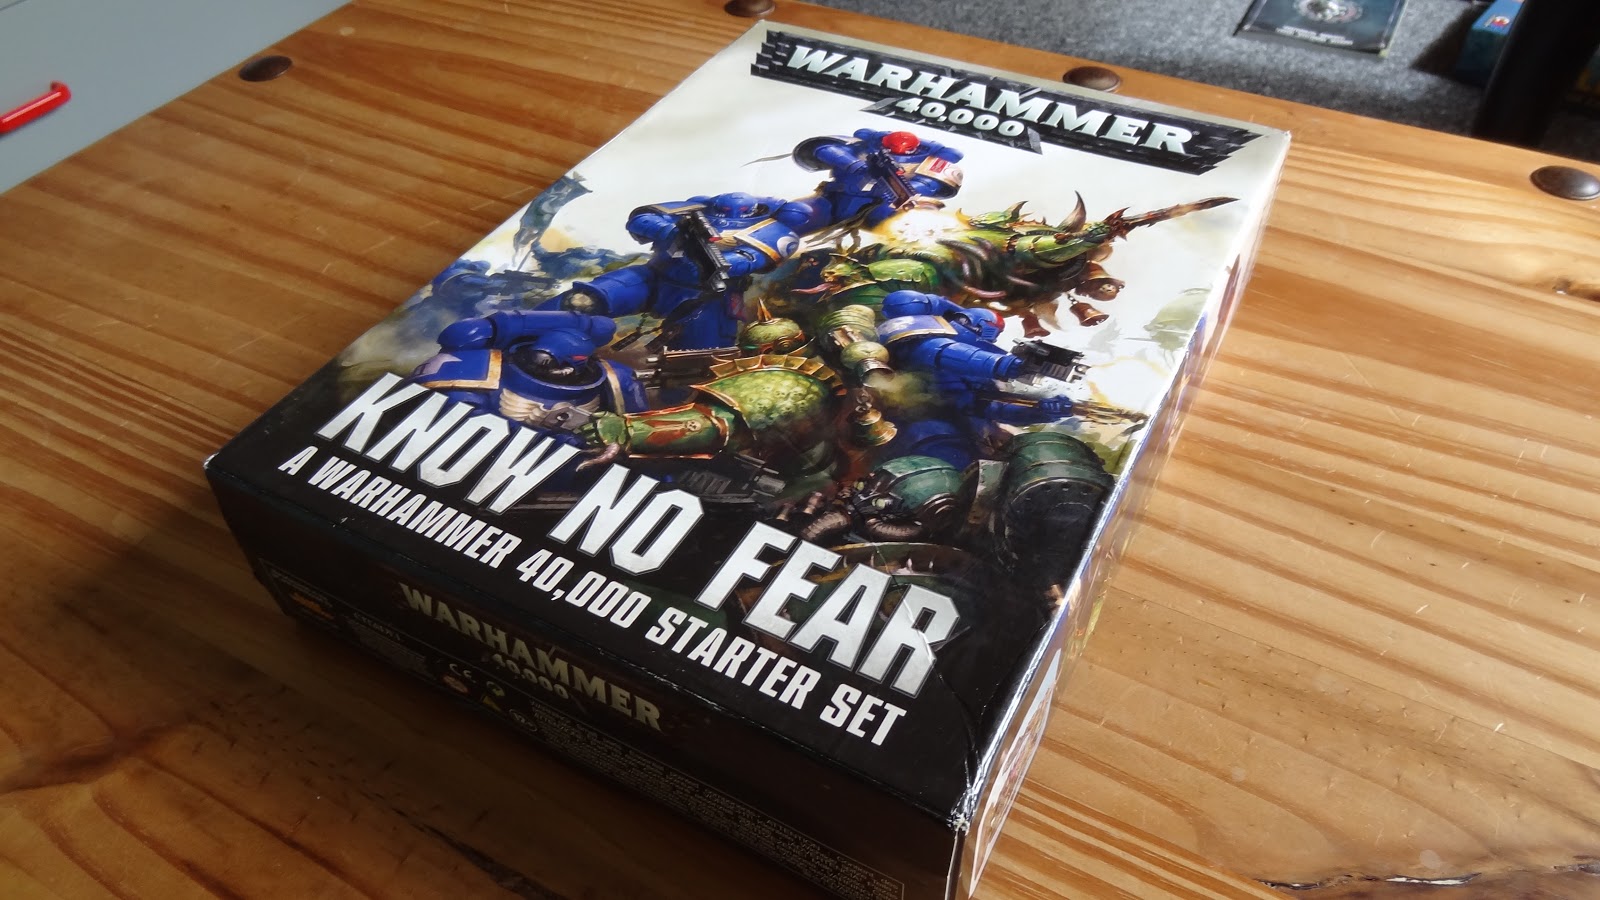 Warhammer 40K Starter Sets compared - which one should you buy